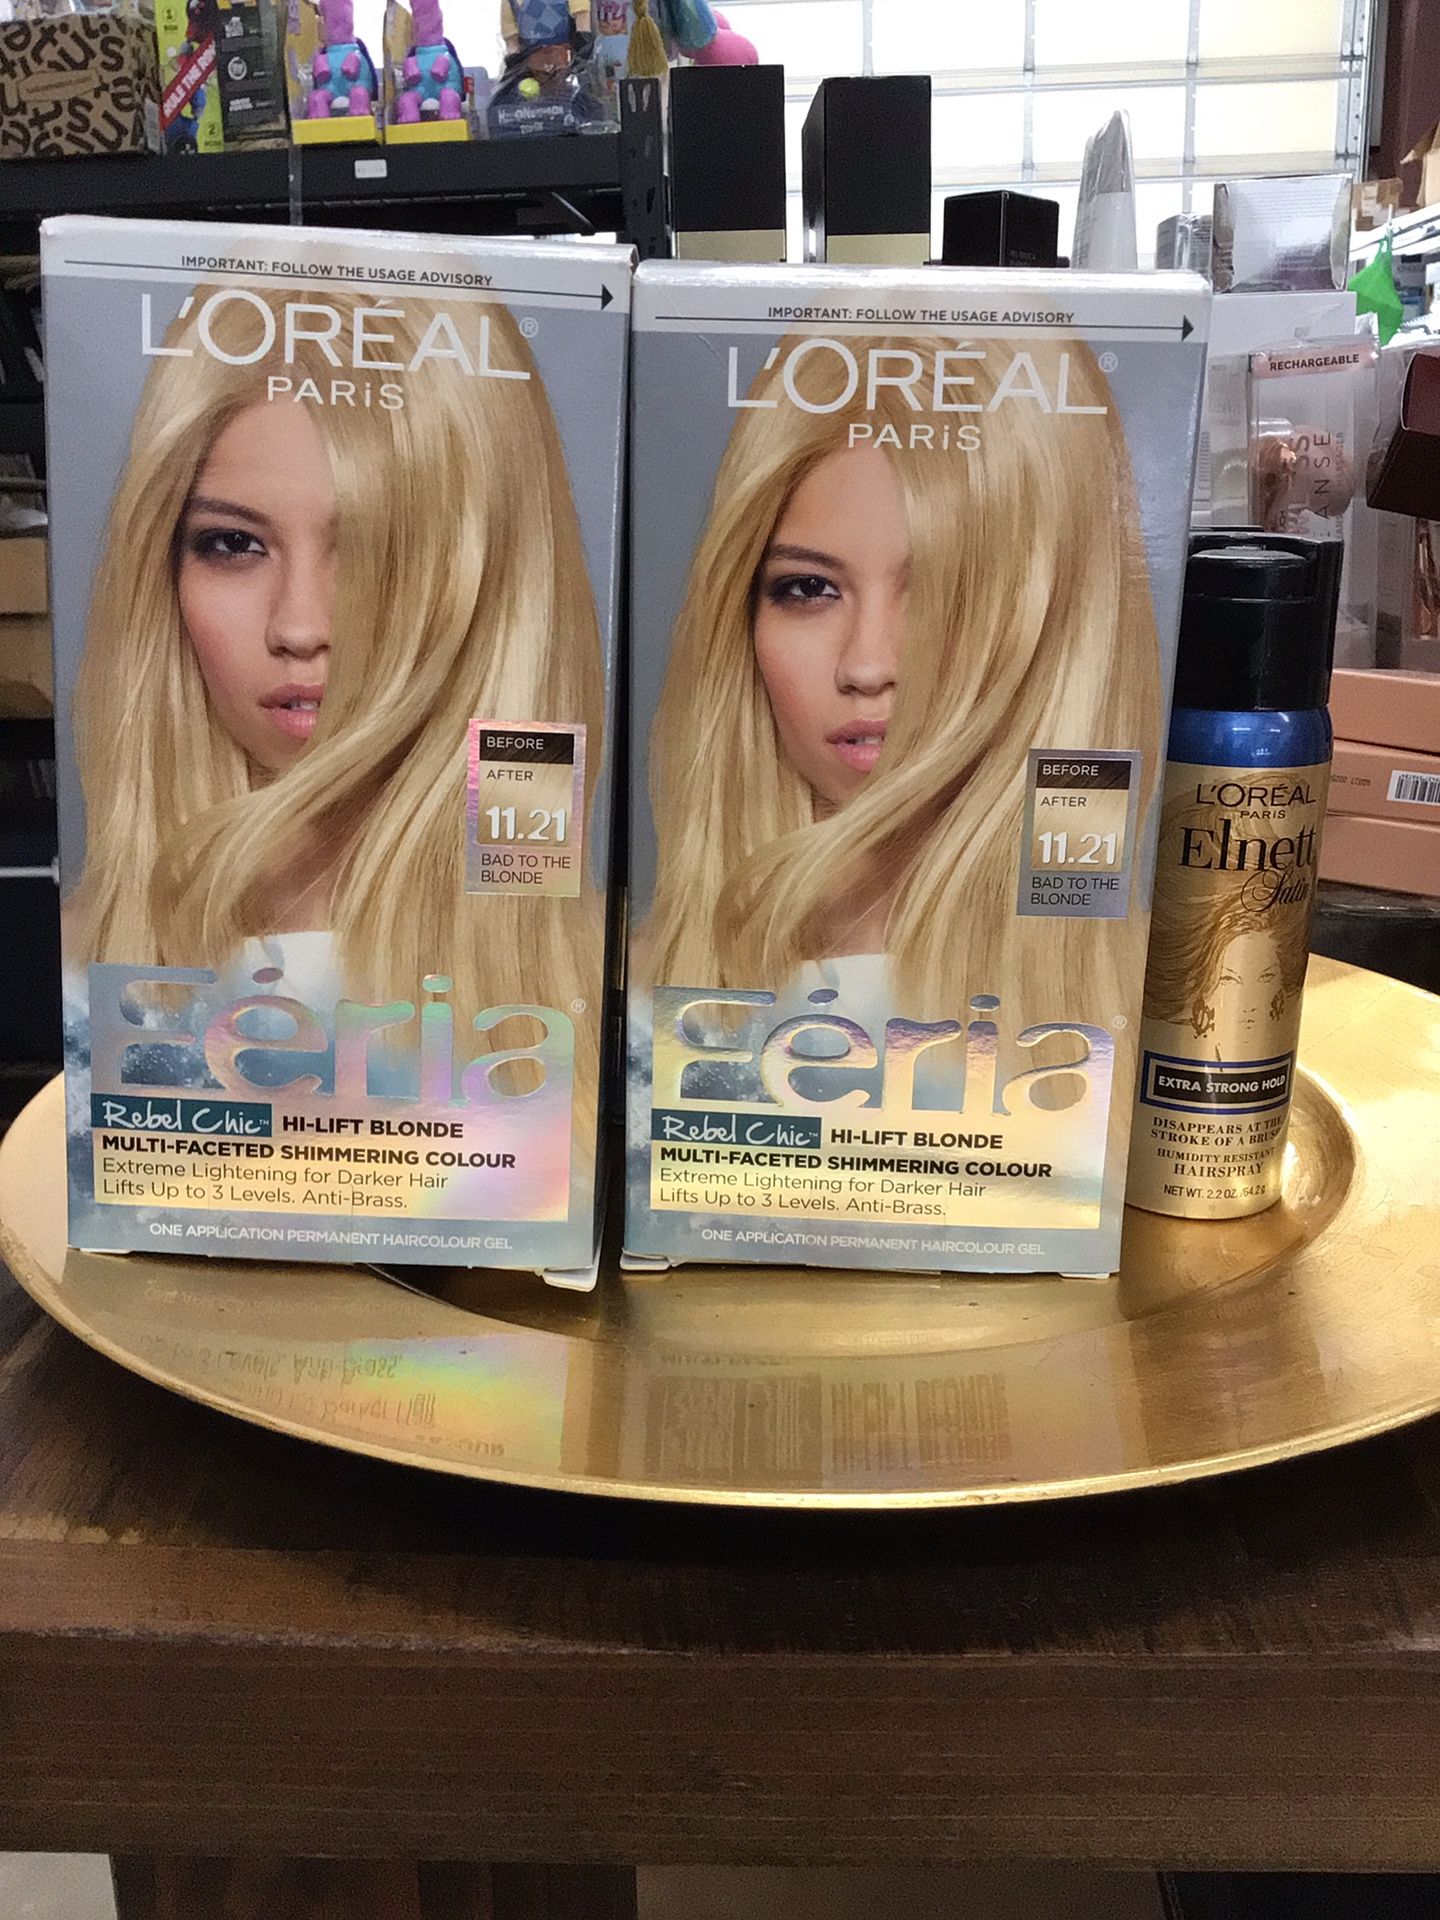 l'oréal high lift blonde multi faced shimmering colour dye//l'oréal elnette latin extra strong hold humidity resista hairspray